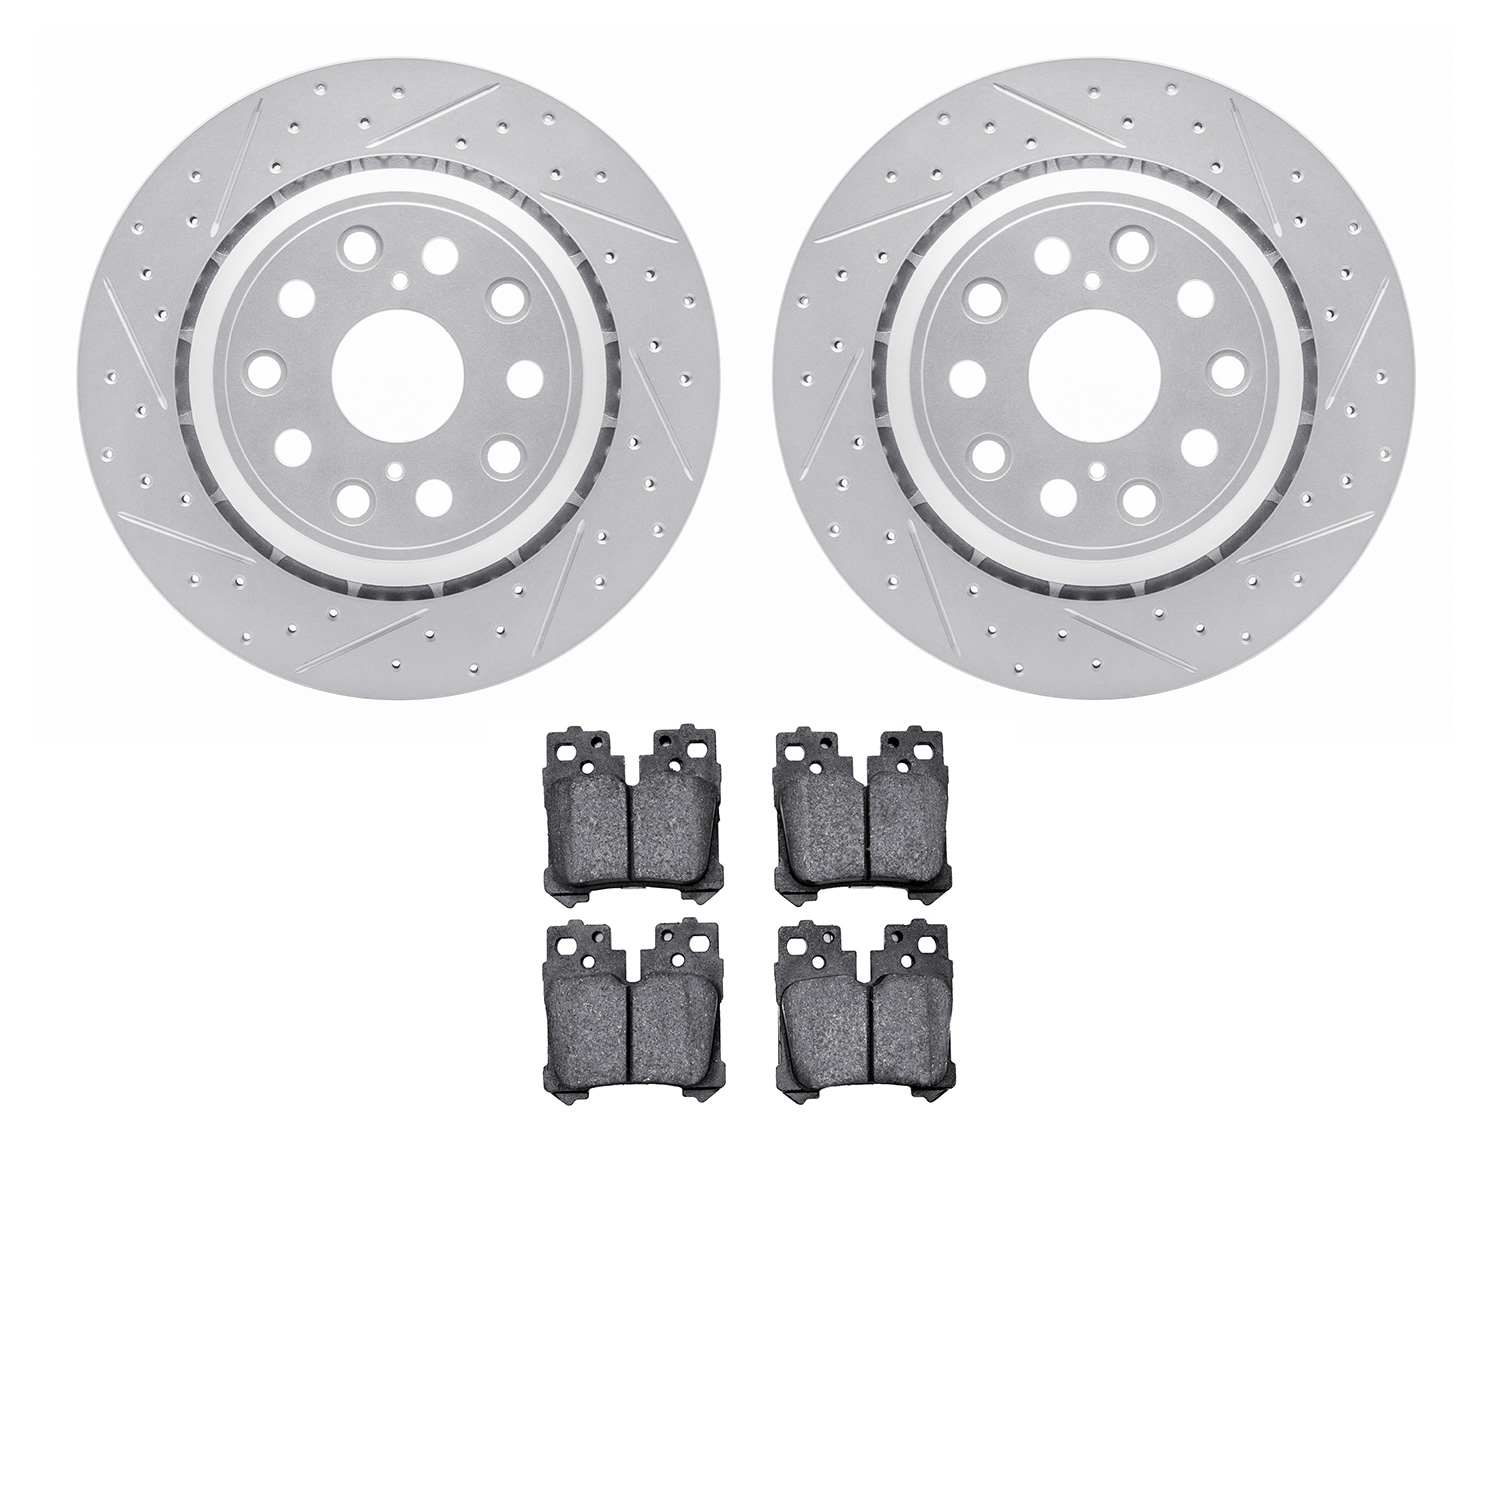 2502-75018 Geoperformance Drilled/Slotted Rotors w/5000 Advanced Brake Pads Kit, 2007-2017 Lexus/Toyota/Scion, Position: Rear